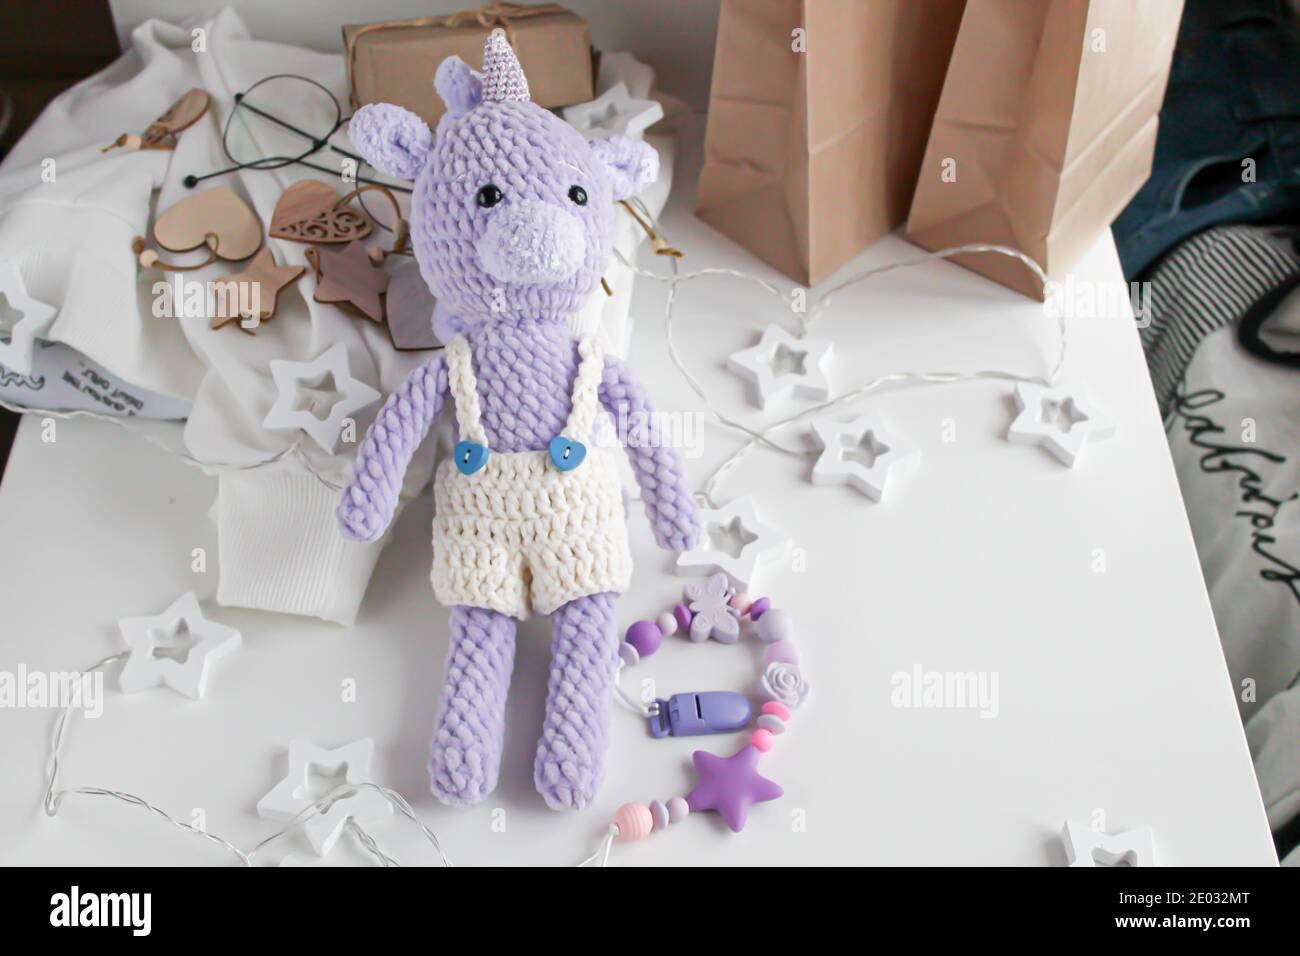 Purple knitted unicorn toy in white shorts lies on the table Stock Photo